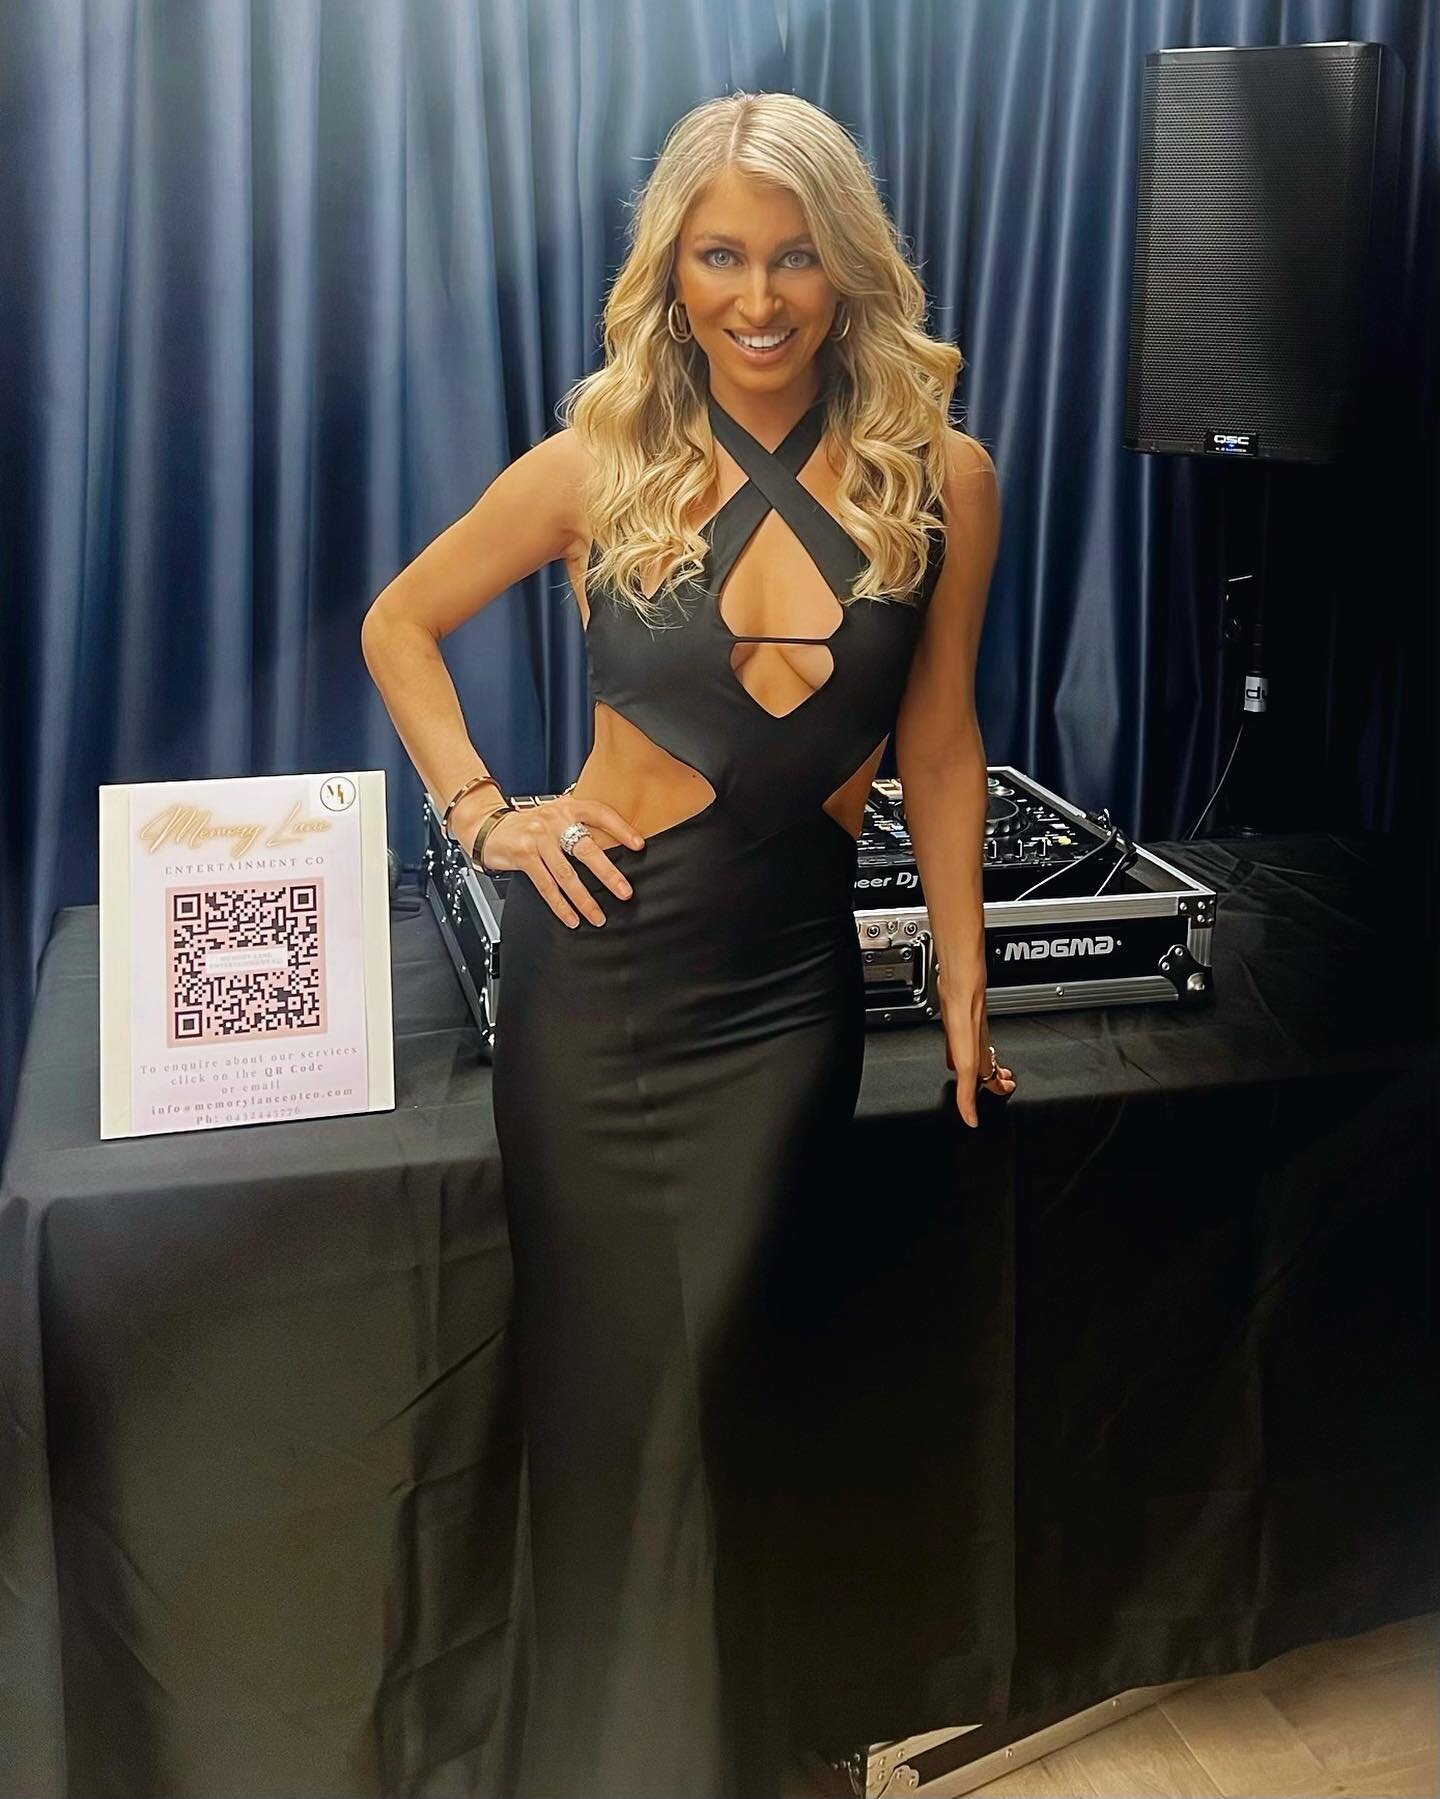 Hi everyone I am Karla Adele, the Owner &amp; Founder of Memory Lane Entertainment Co. 🎤🎧

I am so grateful for this fabulous opportunity to perform for an amazing corporate event last night in Sydney. Thank you to &lsquo;Hellyer Metals&rsquo; for 